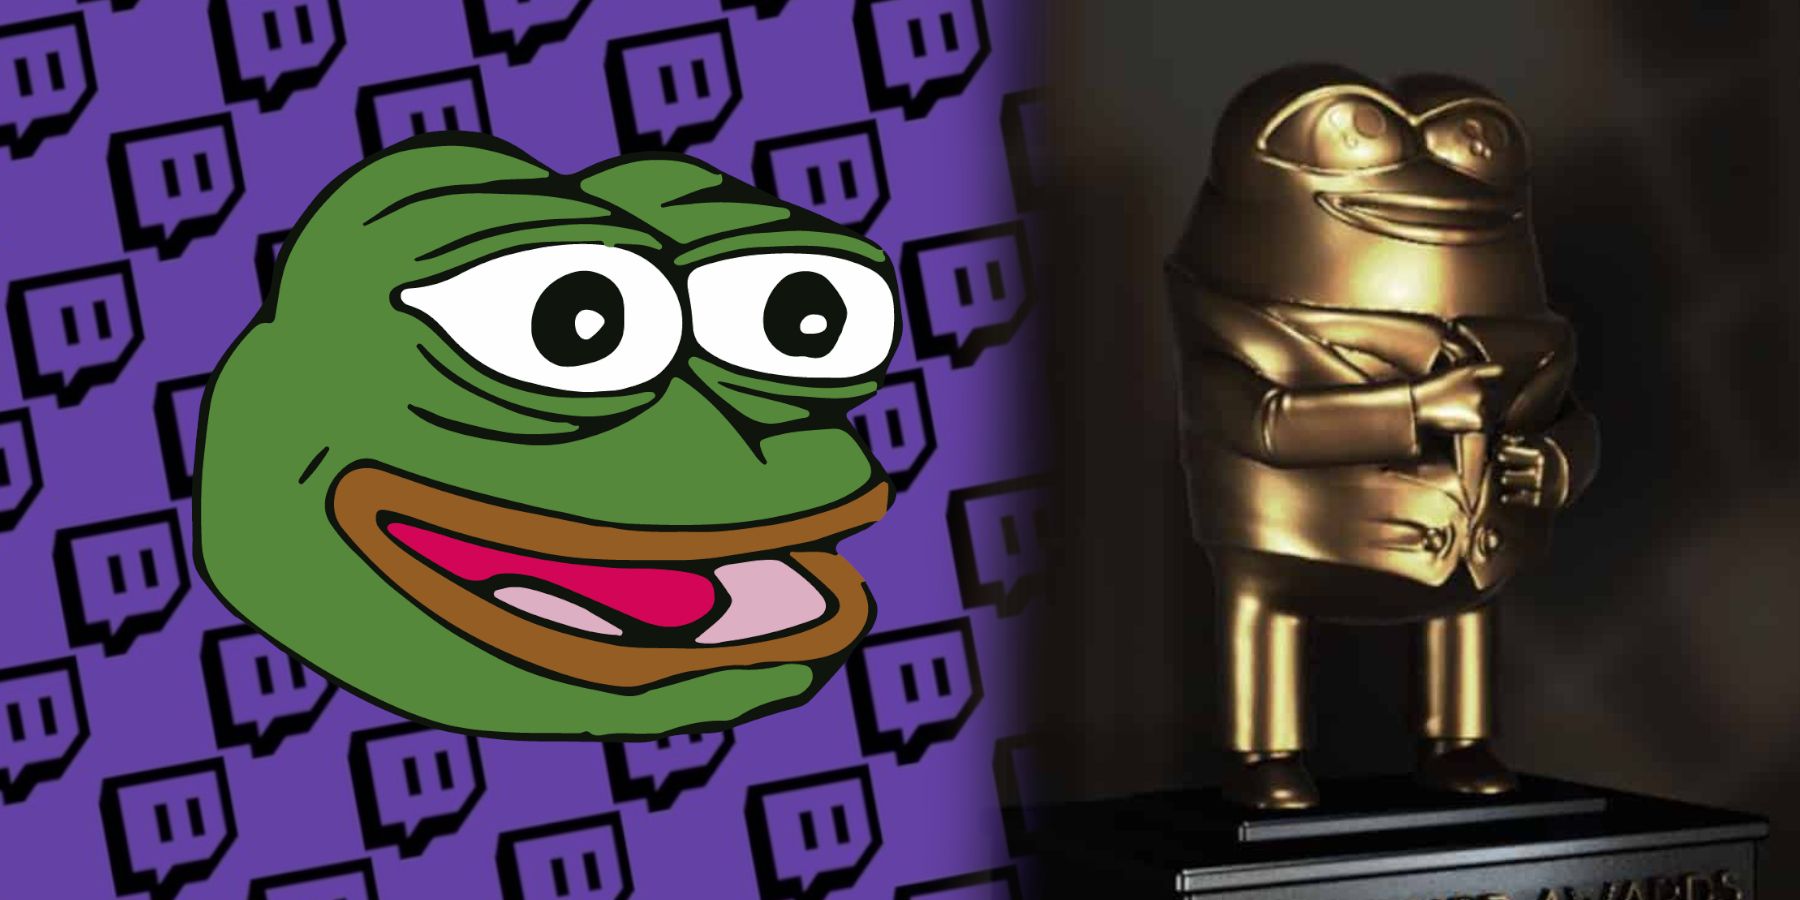 Pepe the frog appears left of The Streamer Awards trophy, which is itself a likeness of Pepe/Peepo.